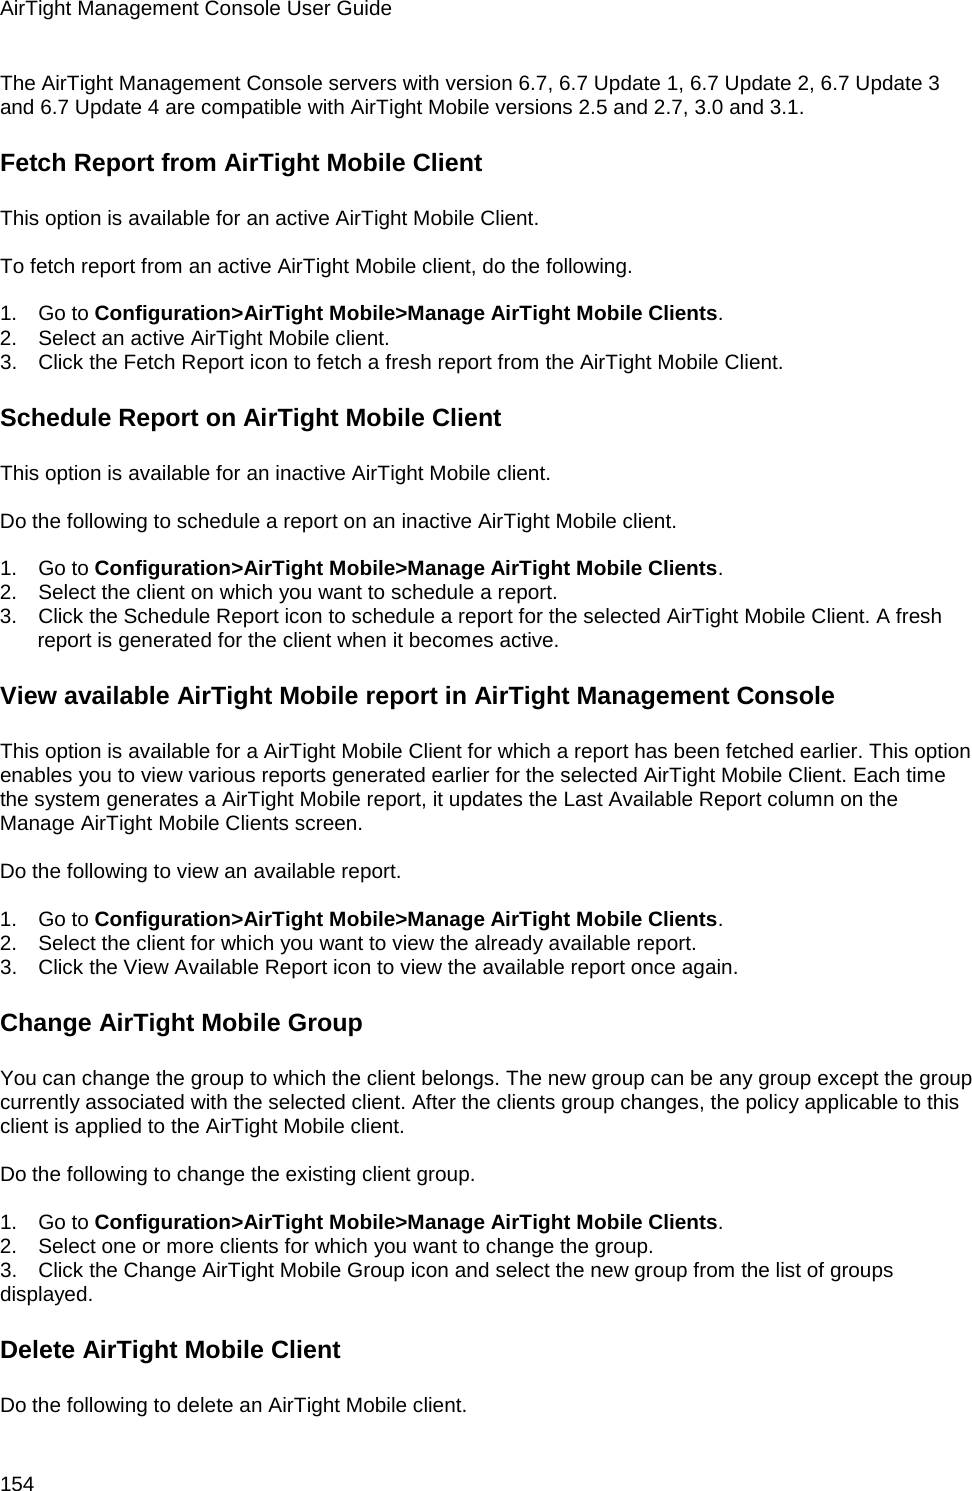 AirTight Management Console User Guide 154 The AirTight Management Console servers with version 6.7, 6.7 Update 1, 6.7 Update 2, 6.7 Update 3 and 6.7 Update 4 are compatible with AirTight Mobile versions 2.5 and 2.7, 3.0 and 3.1. Fetch Report from AirTight Mobile Client This option is available for an active AirTight Mobile Client.    To fetch report from an active AirTight Mobile client, do the following.   1.      Go to Configuration&gt;AirTight Mobile&gt;Manage AirTight Mobile Clients. 2.      Select an active AirTight Mobile client.  3.      Click the Fetch Report icon to fetch a fresh report from the AirTight Mobile Client. Schedule Report on AirTight Mobile Client This option is available for an inactive AirTight Mobile client.    Do the following to schedule a report on an inactive AirTight Mobile client.   1.      Go to Configuration&gt;AirTight Mobile&gt;Manage AirTight Mobile Clients. 2.      Select the client on which you want to schedule a report. 3.      Click the Schedule Report icon to schedule a report for the selected AirTight Mobile Client. A fresh report is generated for the client when it becomes active. View available AirTight Mobile report in AirTight Management Console This option is available for a AirTight Mobile Client for which a report has been fetched earlier. This option enables you to view various reports generated earlier for the selected AirTight Mobile Client. Each time the system generates a AirTight Mobile report, it updates the Last Available Report column on the Manage AirTight Mobile Clients screen.   Do the following to view an available report.   1.      Go to Configuration&gt;AirTight Mobile&gt;Manage AirTight Mobile Clients. 2.      Select the client for which you want to view the already available report. 3.      Click the View Available Report icon to view the available report once again. Change AirTight Mobile Group You can change the group to which the client belongs. The new group can be any group except the group currently associated with the selected client. After the clients group changes, the policy applicable to this client is applied to the AirTight Mobile client.   Do the following to change the existing client group.   1.      Go to Configuration&gt;AirTight Mobile&gt;Manage AirTight Mobile Clients. 2.      Select one or more clients for which you want to change the group. 3.      Click the Change AirTight Mobile Group icon and select the new group from the list of groups displayed. Delete AirTight Mobile Client Do the following to delete an AirTight Mobile client. 